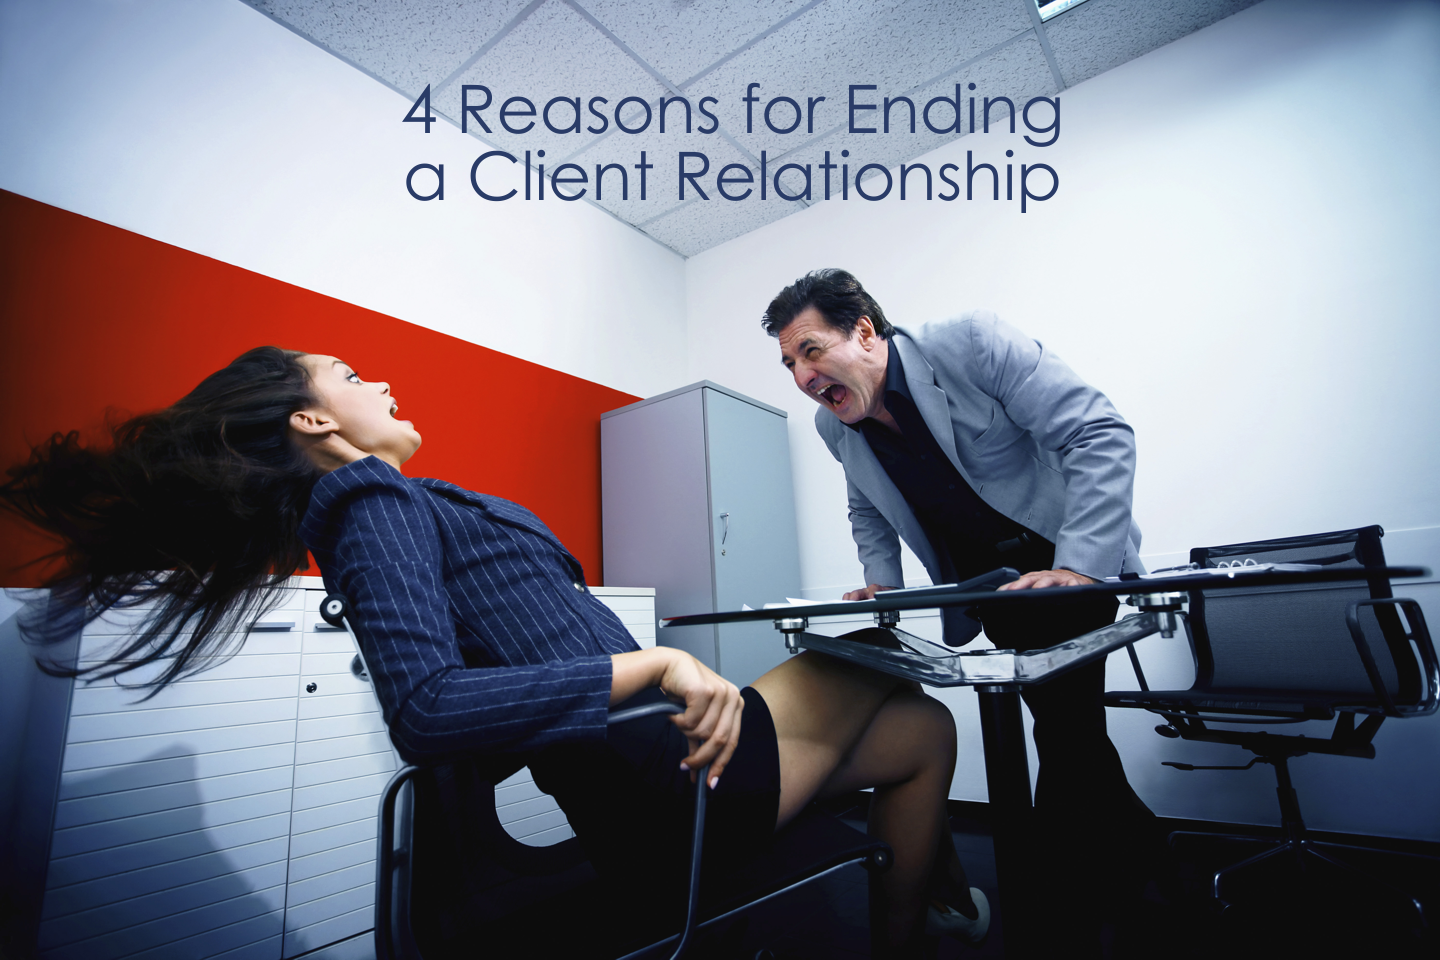 4 Reasons for Ending a Client Relationship